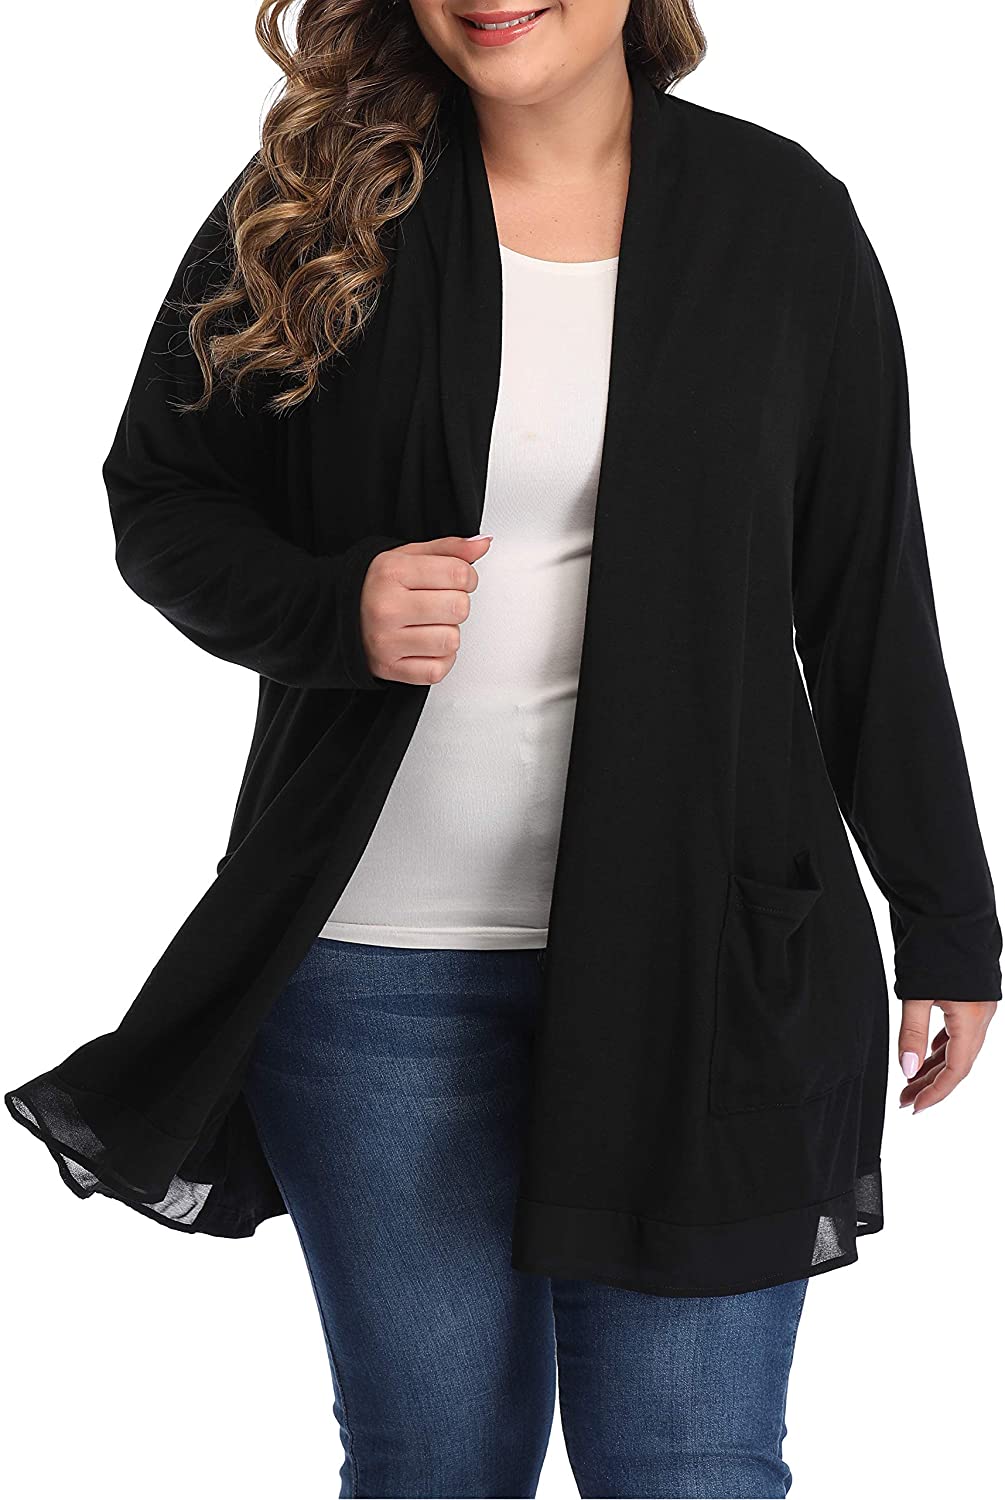 Shiaili Long Plus Size Cardigans for Women Easy to Wear Open Front Clothing 